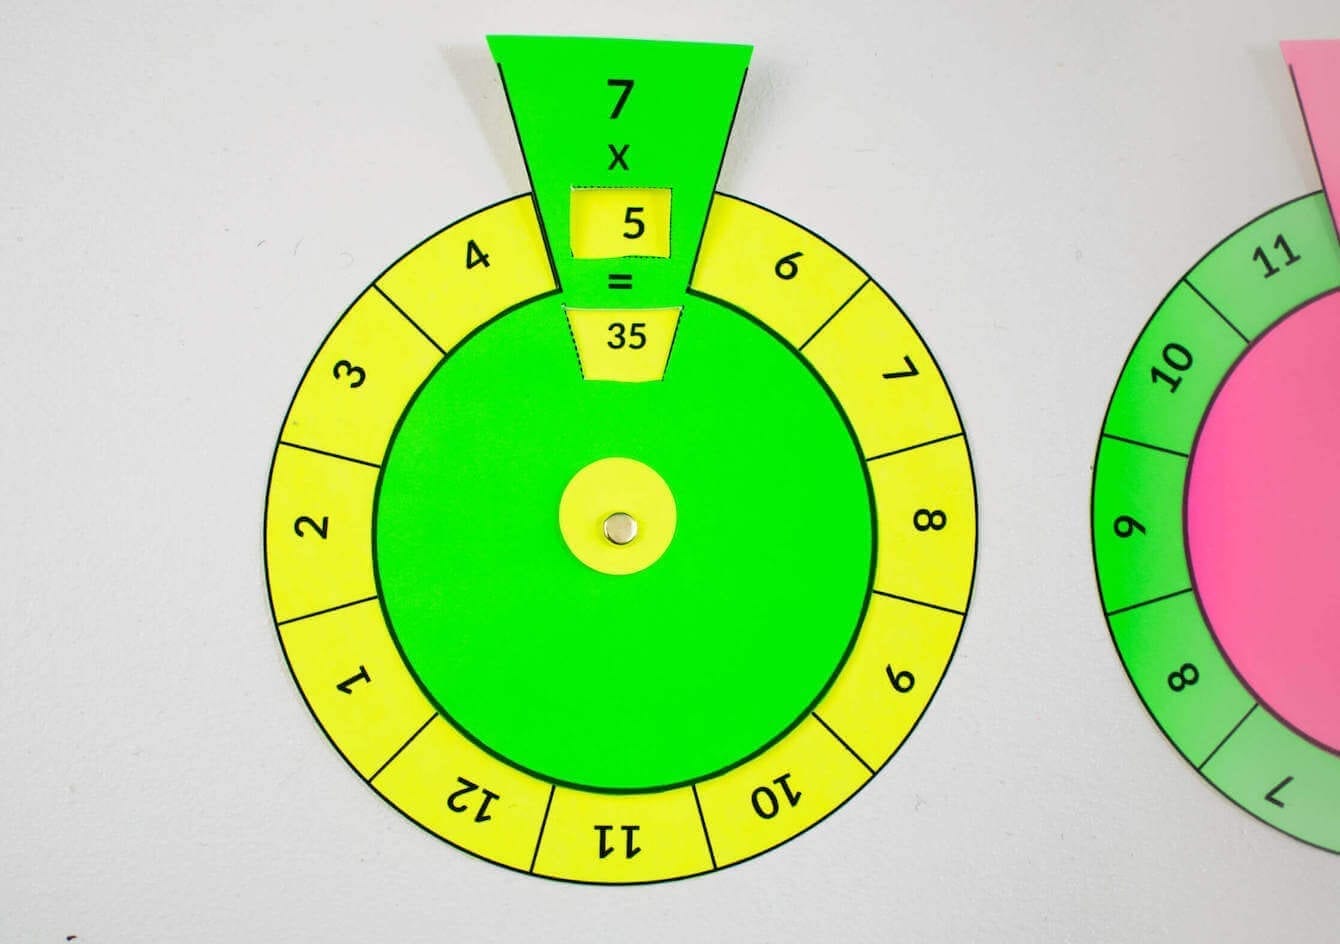 multiplication-tables-spinning-wheels-show-my-crafts